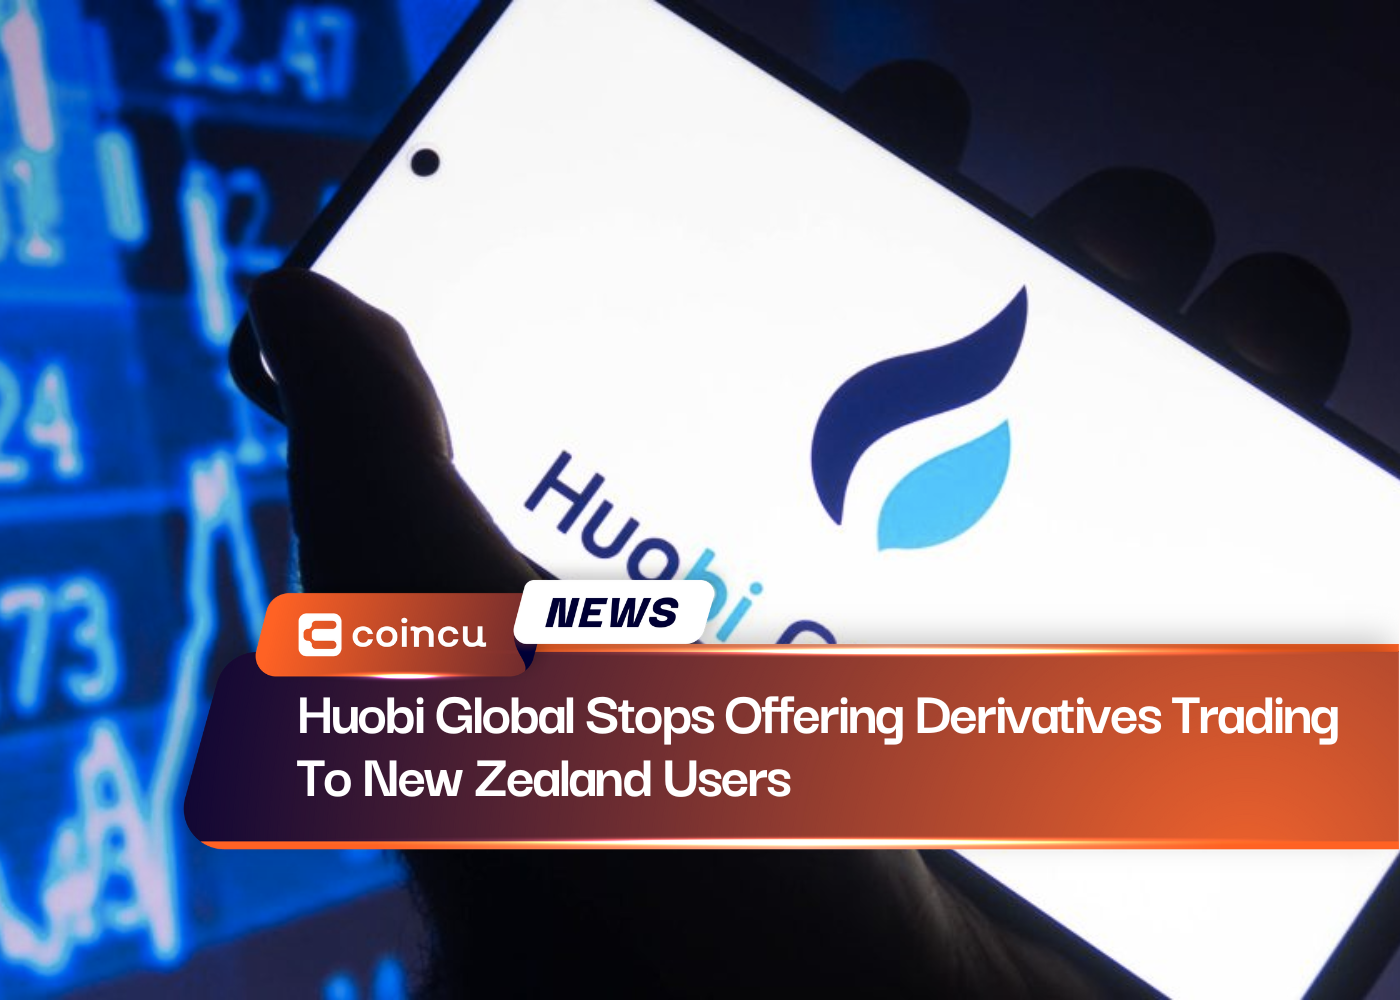 Huobi Global Stops Offering Derivatives Trading To New Zealand Users